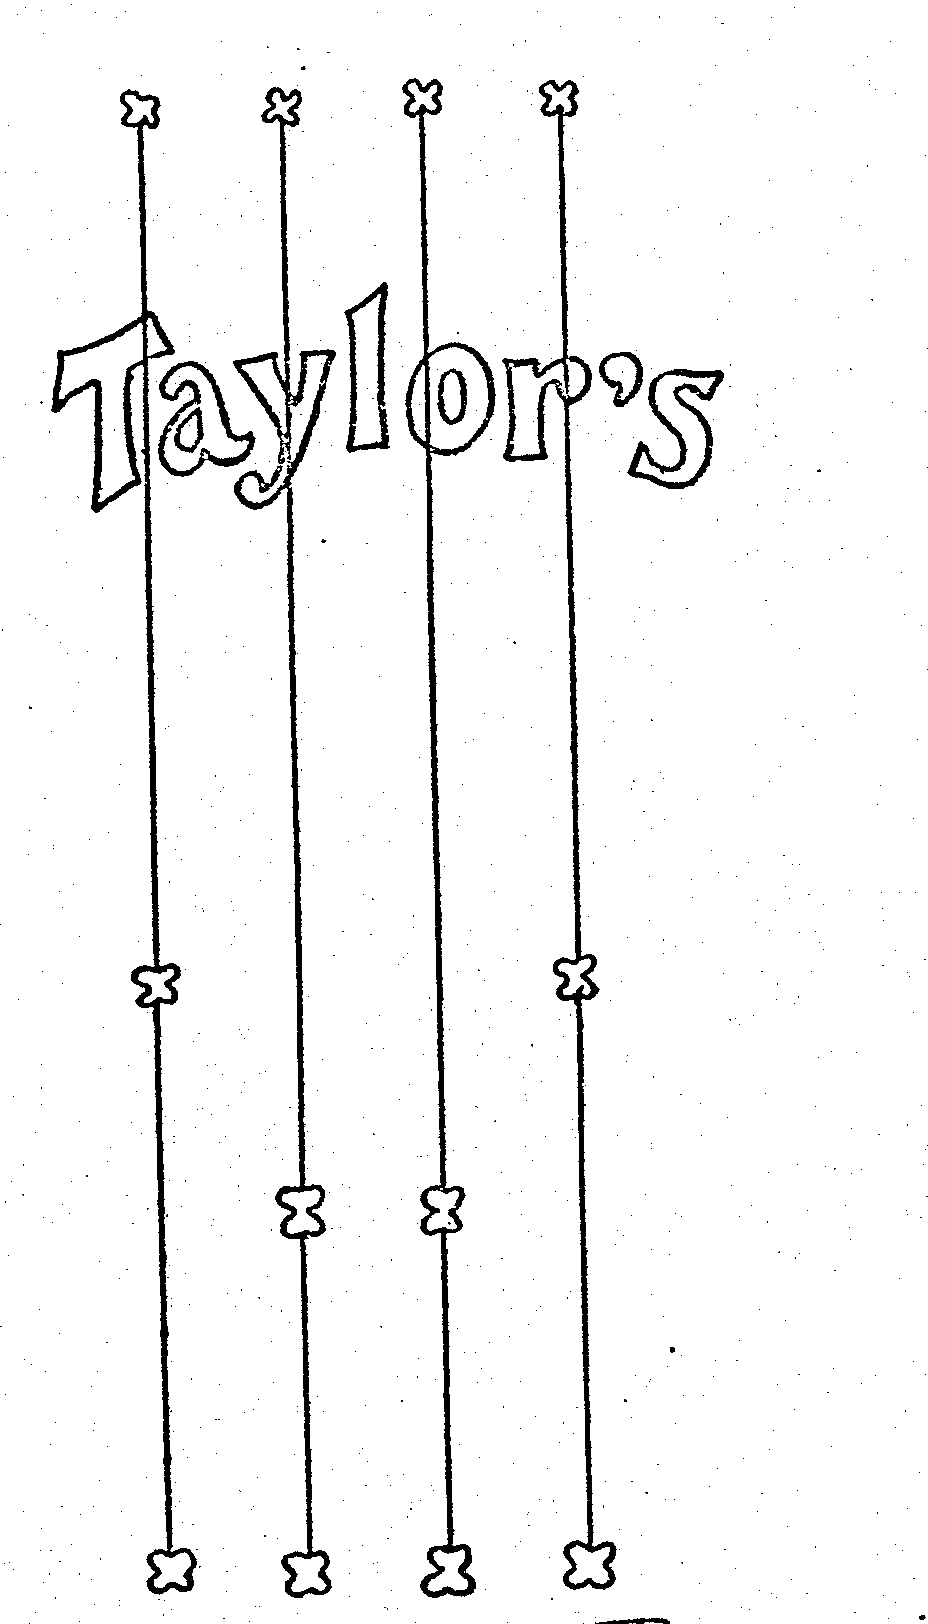  "TAYLOR'S"